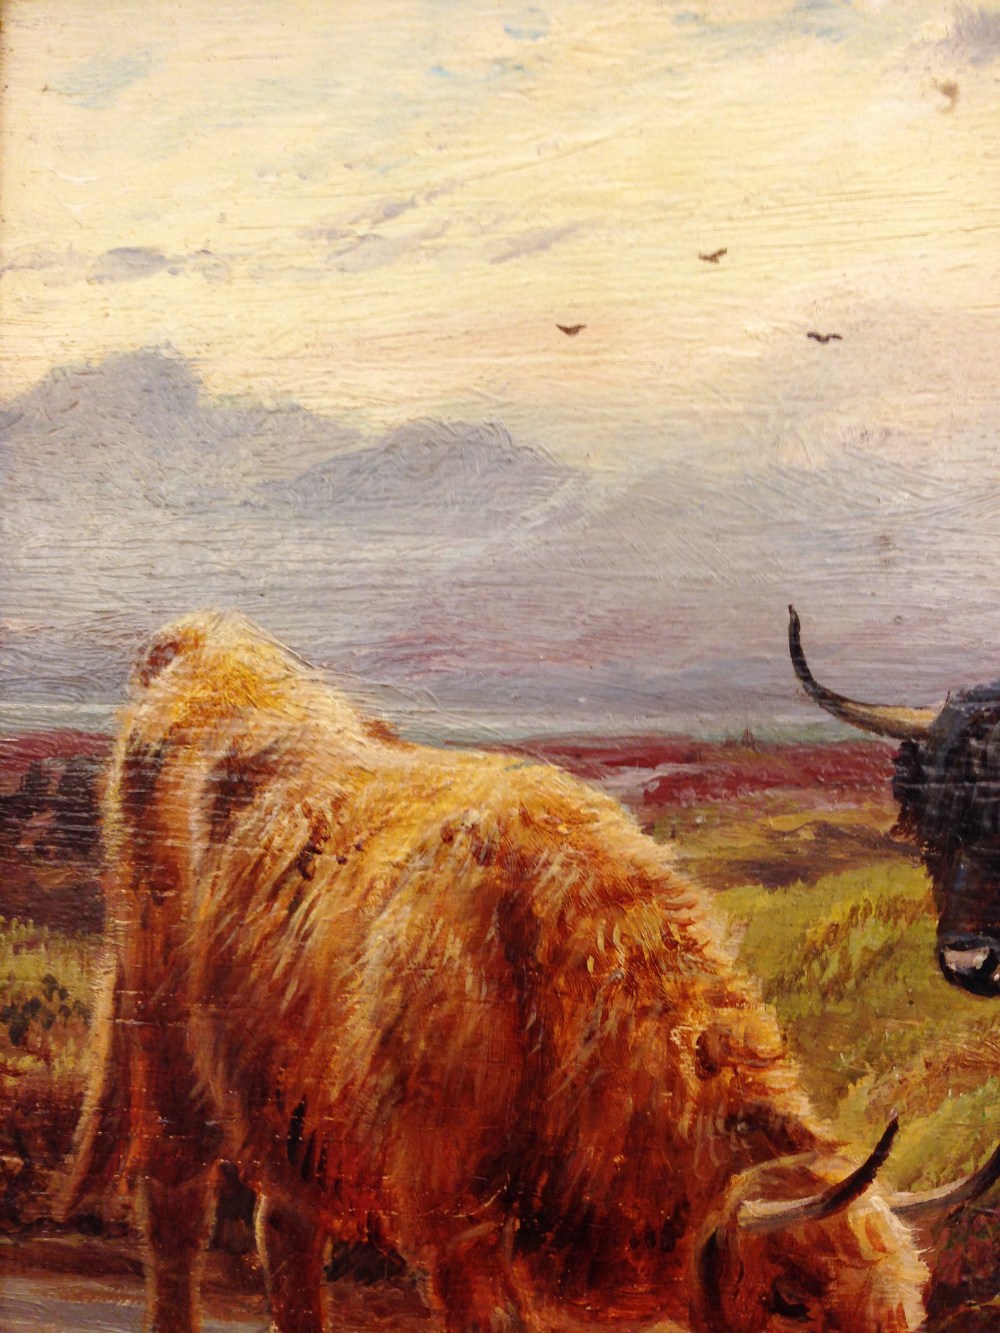 Robert Watson (British, 1865-1916) Highland Cattle signed and dated lower right "R Watson 1887" with - Image 4 of 6